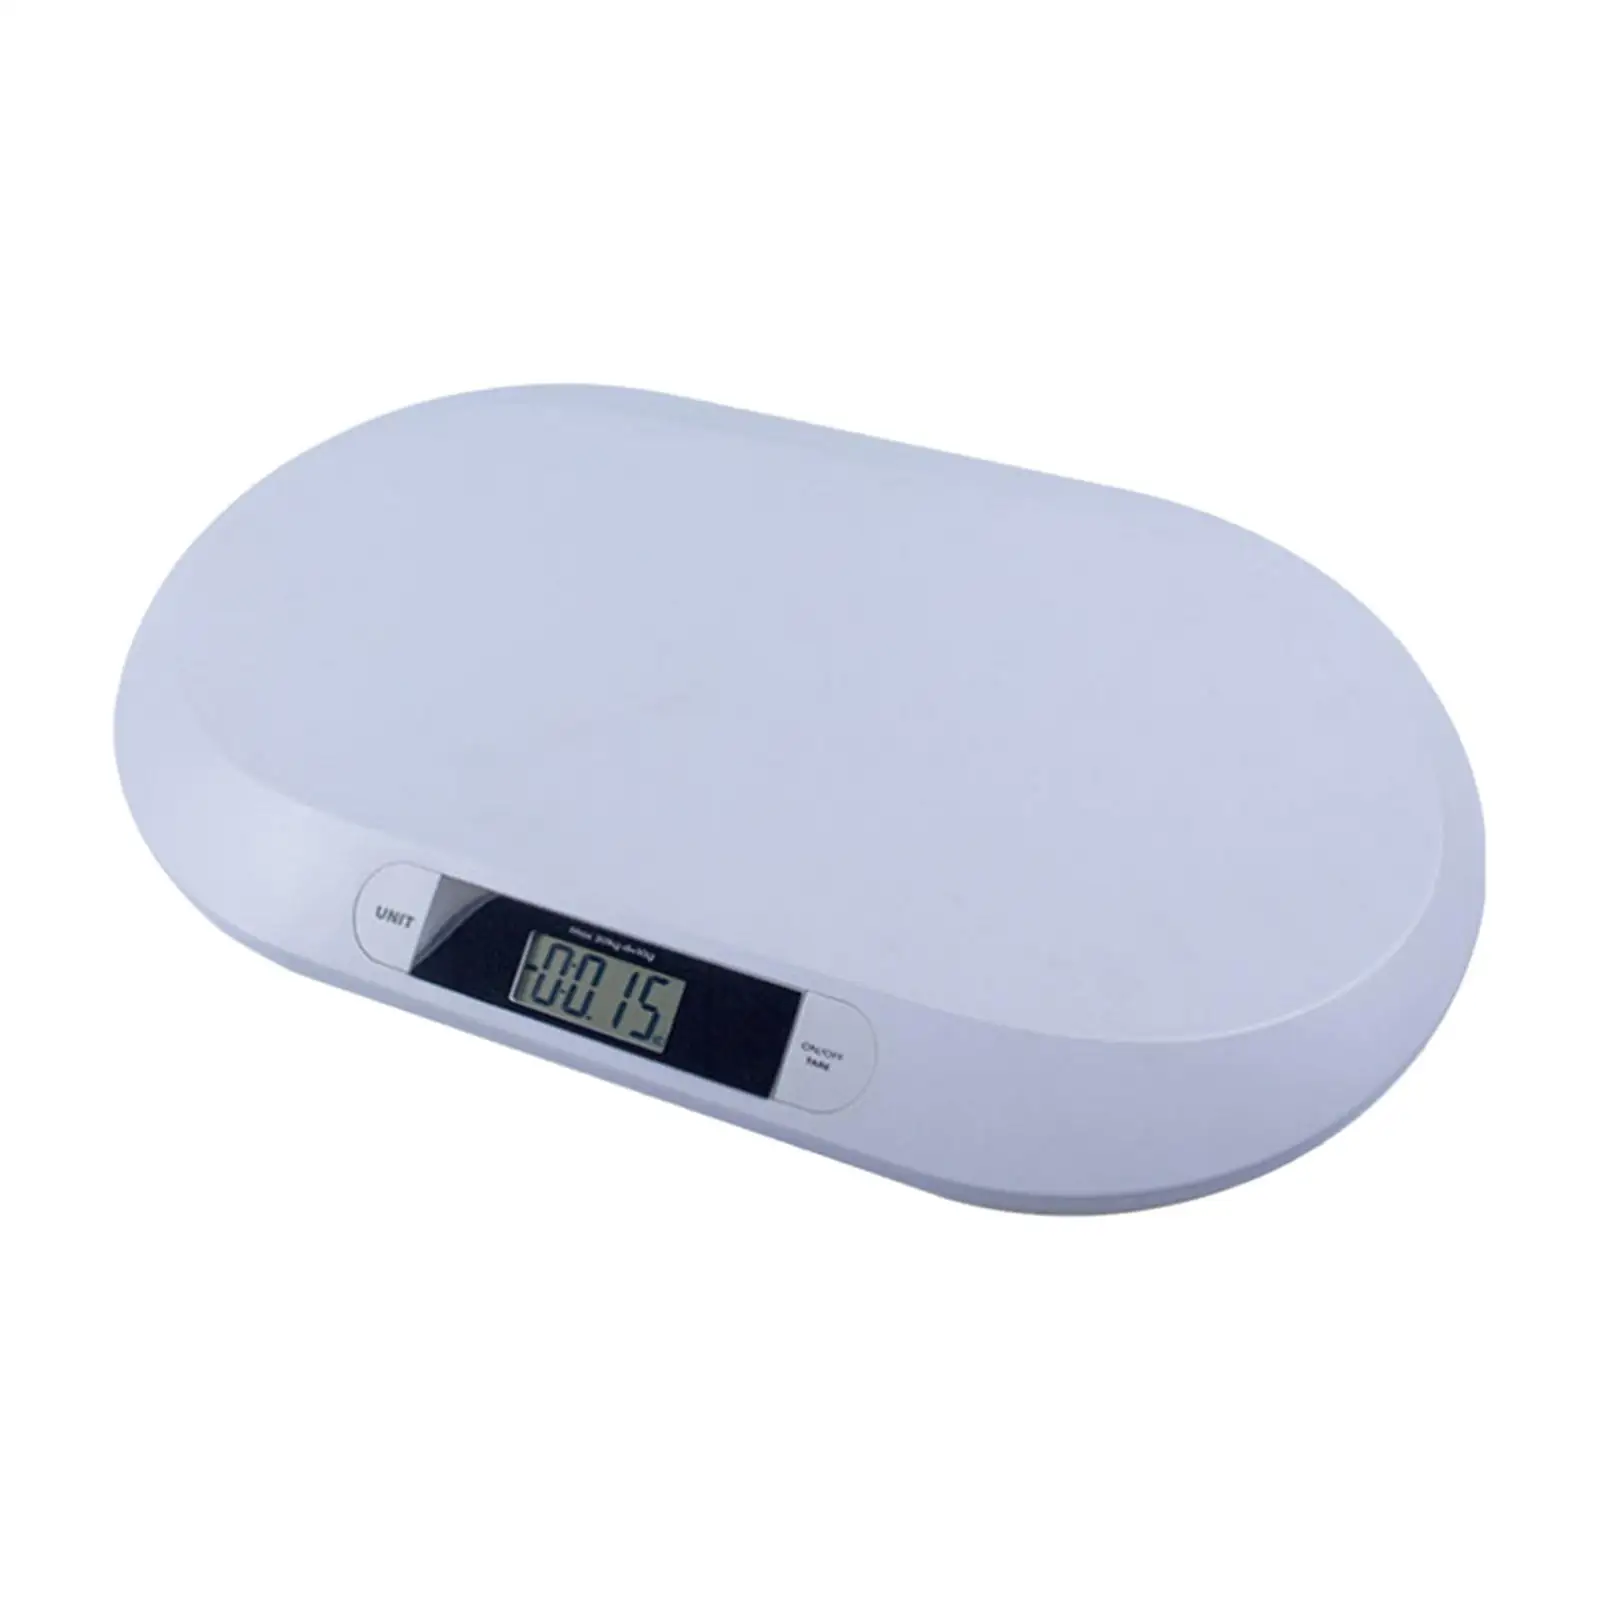 Electronic Pet Scale Accurate LCD Display 20kg Comfort for Infants Cats Dogs